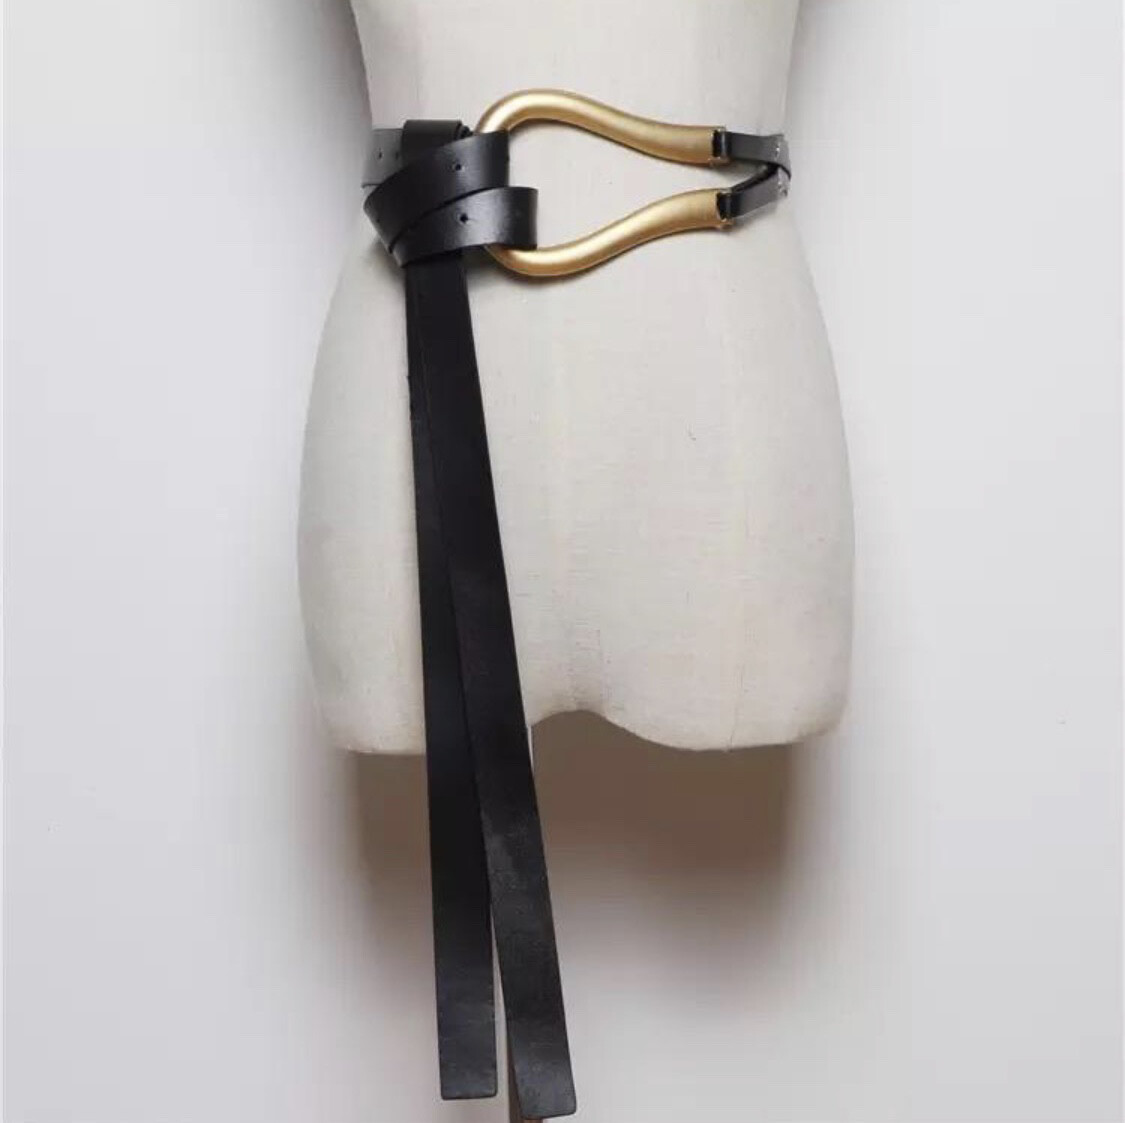 Knotted Belt